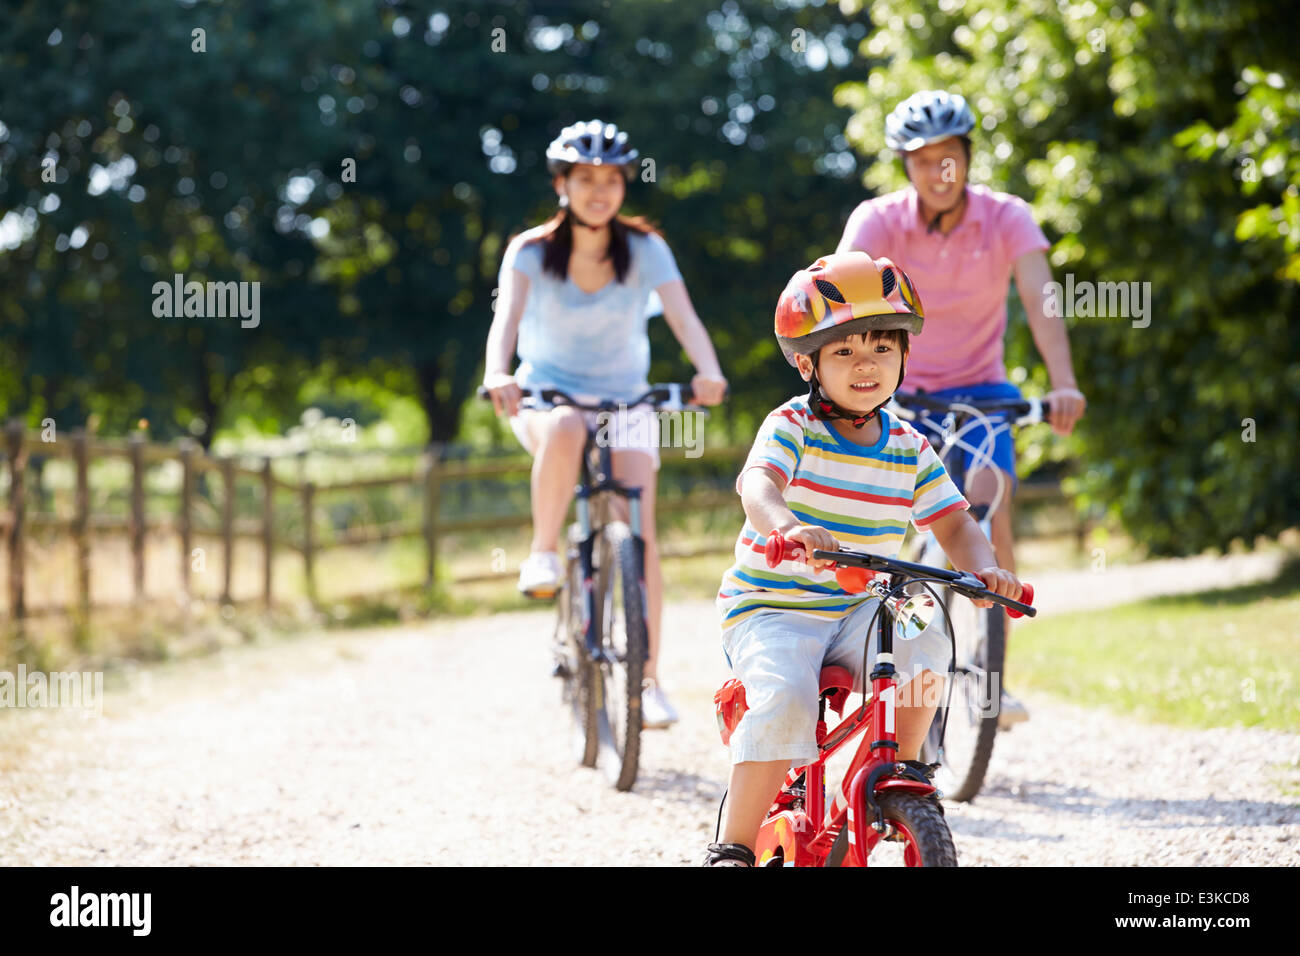 Asian Family On Cycle Ride In Countryside Stock Photo